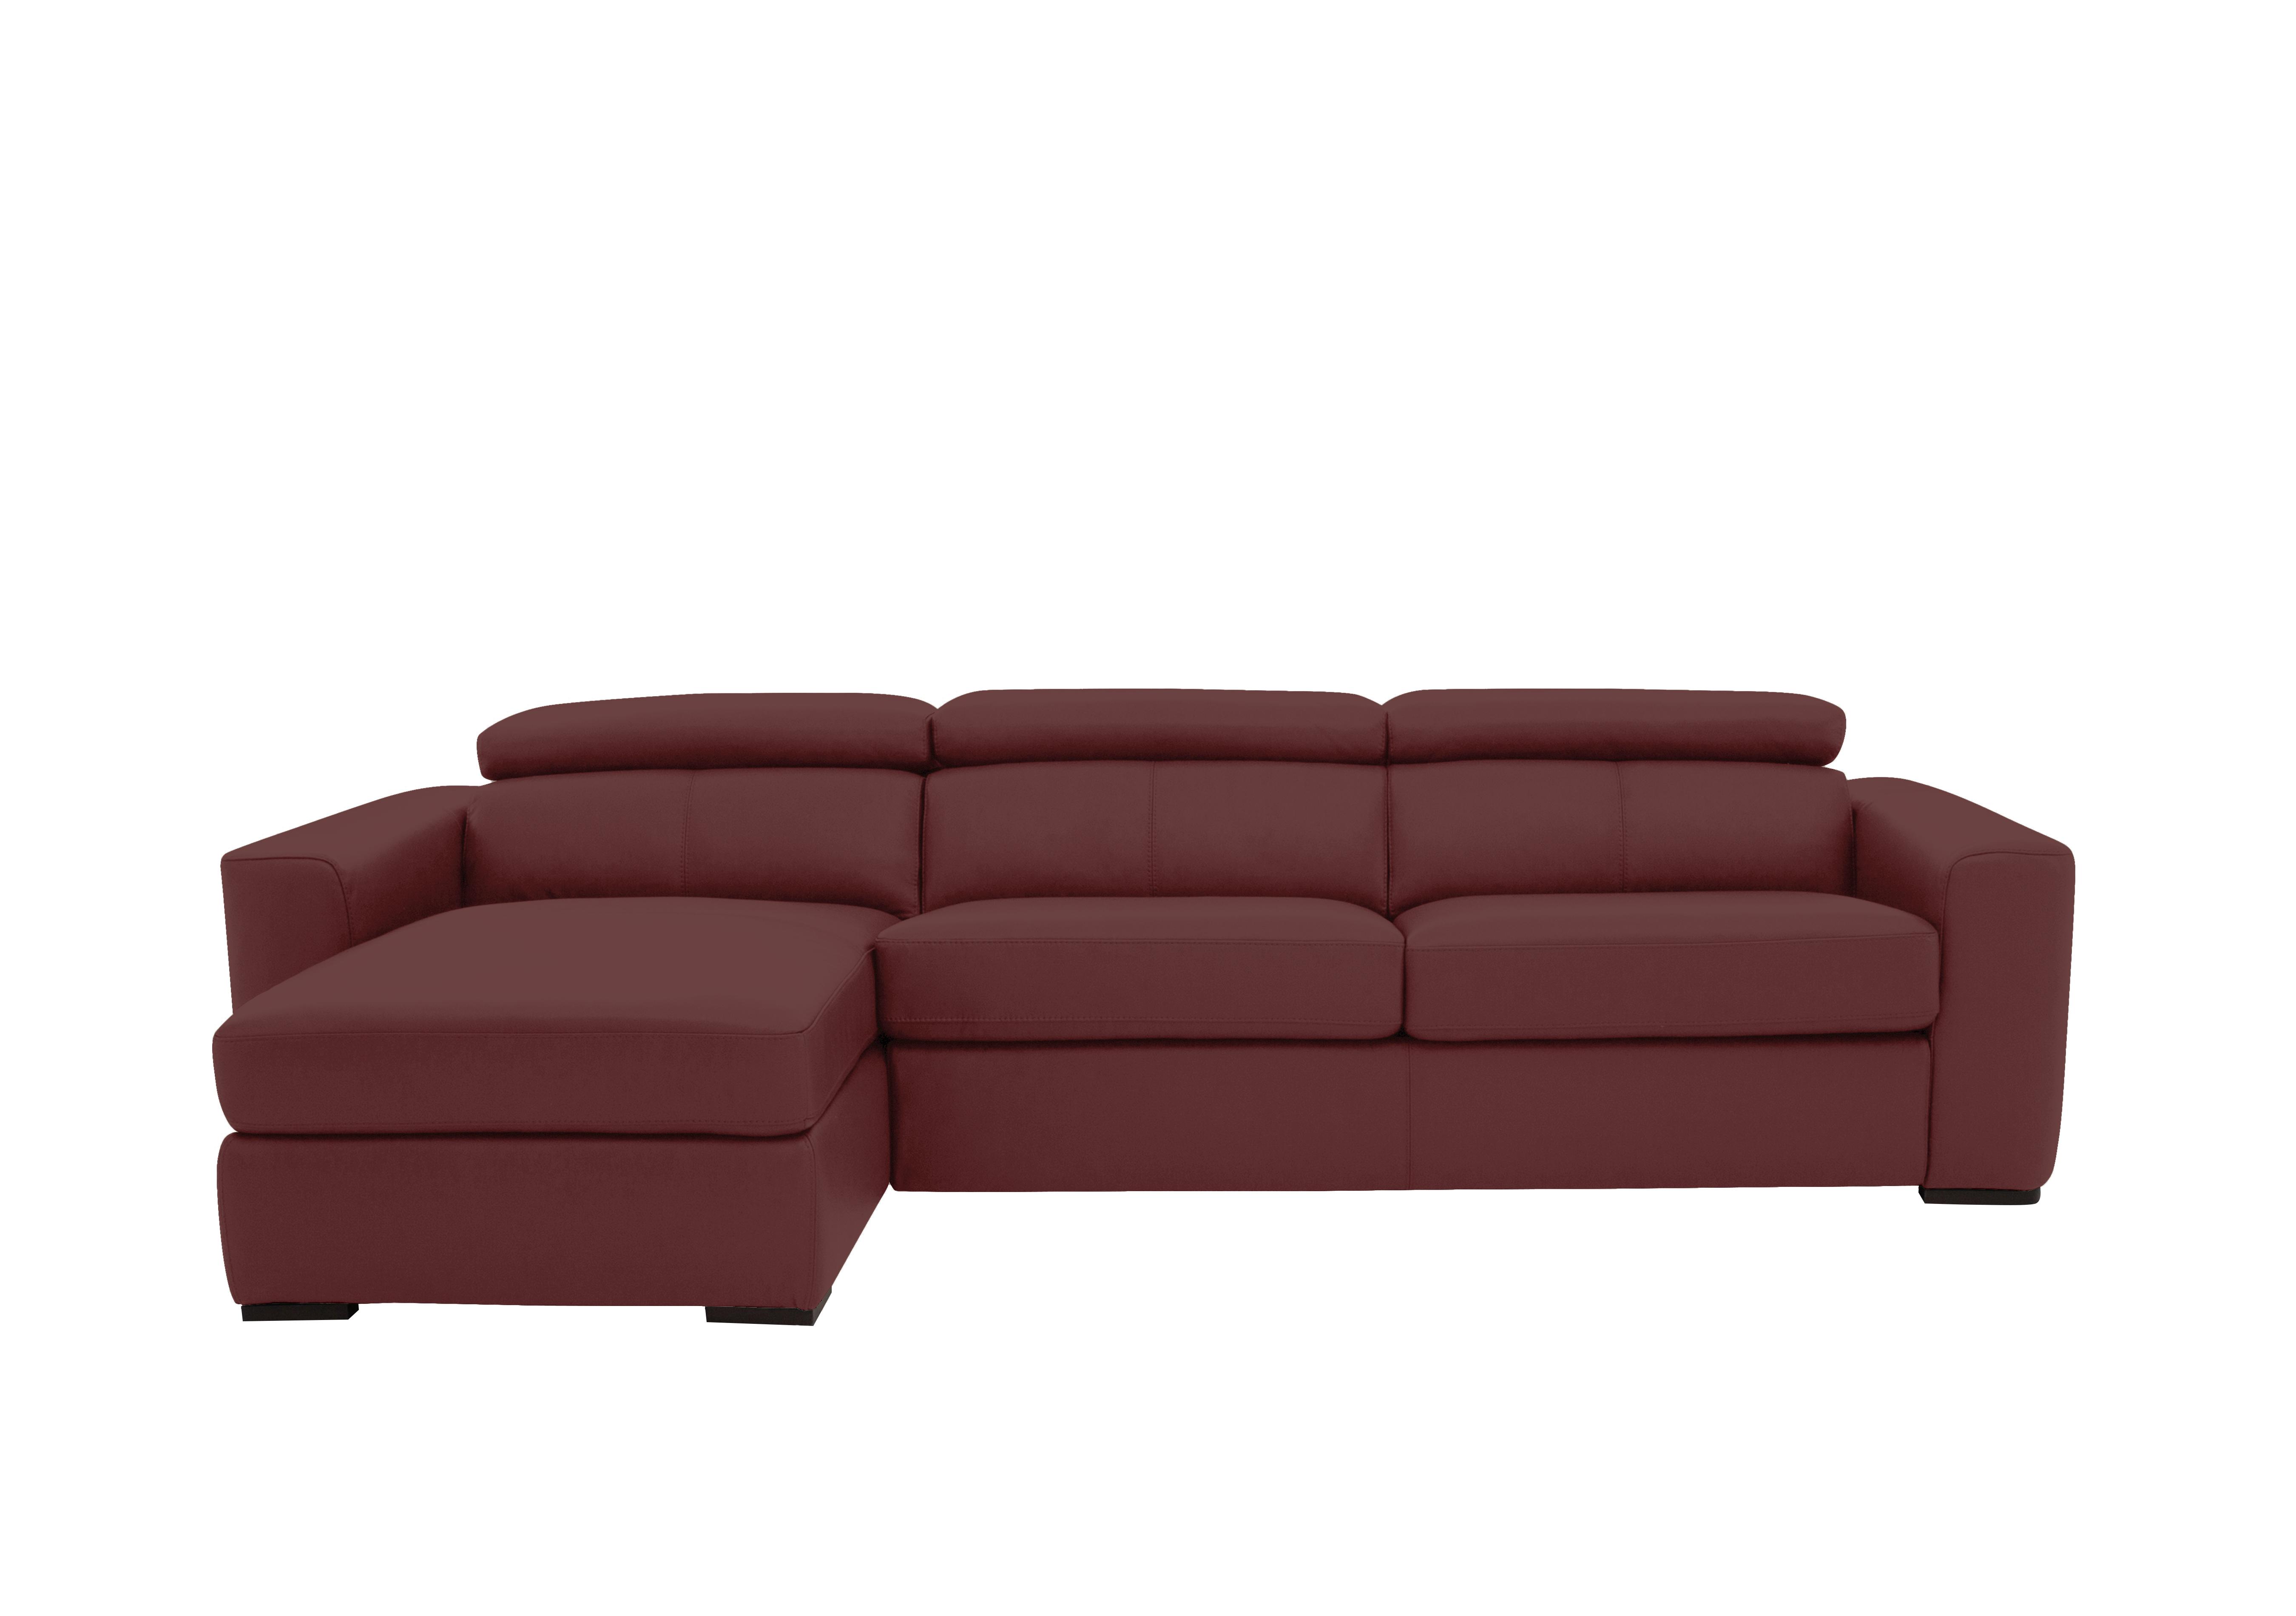 Infinity Leather Corner Chaise Sofabed with Storage in Bv-035c Deep Red on Furniture Village